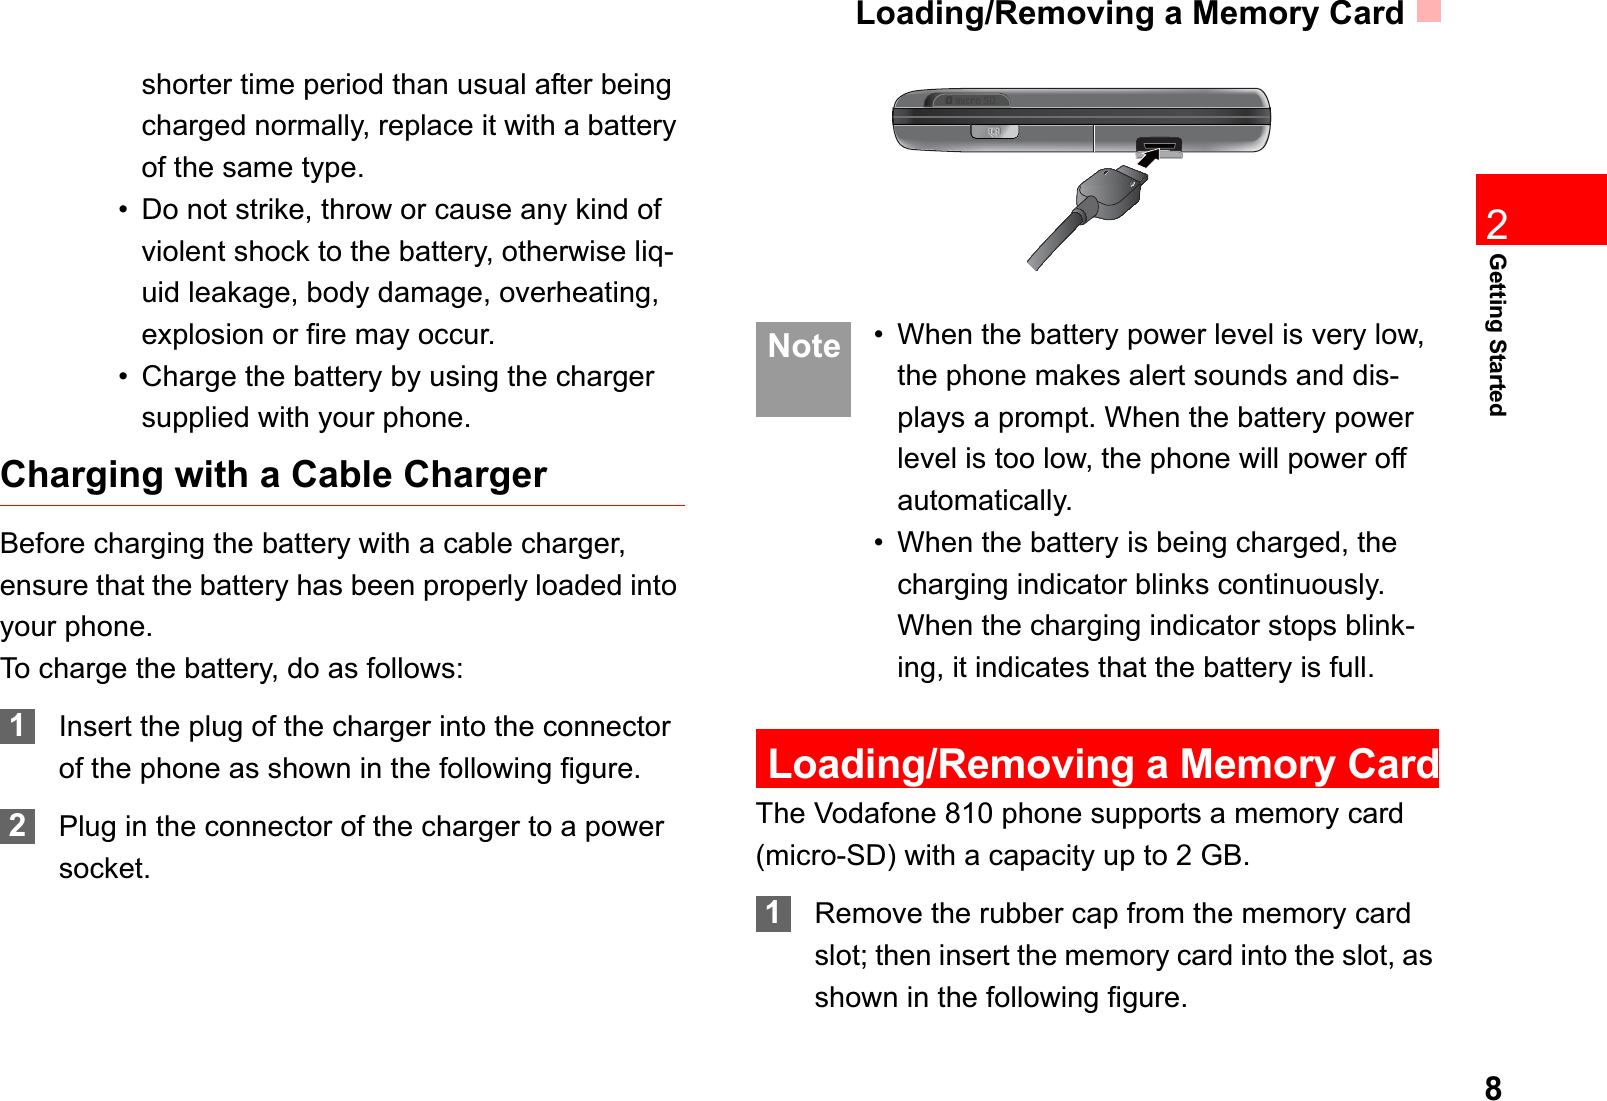 Loading/Removing a Memory Card8Getting Started2shorter time period than usual after being charged normally, replace it with a battery of the same type.• Do not strike, throw or cause any kind of violent shock to the battery, otherwise liq-uid leakage, body damage, overheating, explosion or fire may occur.• Charge the battery by using the charger supplied with your phone.Charging with a Cable ChargerBefore charging the battery with a cable charger, ensure that the battery has been properly loaded into your phone.To charge the battery, do as follows:1Insert the plug of the charger into the connector of the phone as shown in the following figure. 2Plug in the connector of the charger to a power socket. Note • When the battery power level is very low, the phone makes alert sounds and dis-plays a prompt. When the battery power level is too low, the phone will power off automatically.• When the battery is being charged, the charging indicator blinks continuously. When the charging indicator stops blink-ing, it indicates that the battery is full.Loading/Removing a Memory CardThe Vodafone 810 phone supports a memory card (micro-SD) with a capacity up to 2 GB.1Remove the rubber cap from the memory card slot; then insert the memory card into the slot, as shown in the following figure.